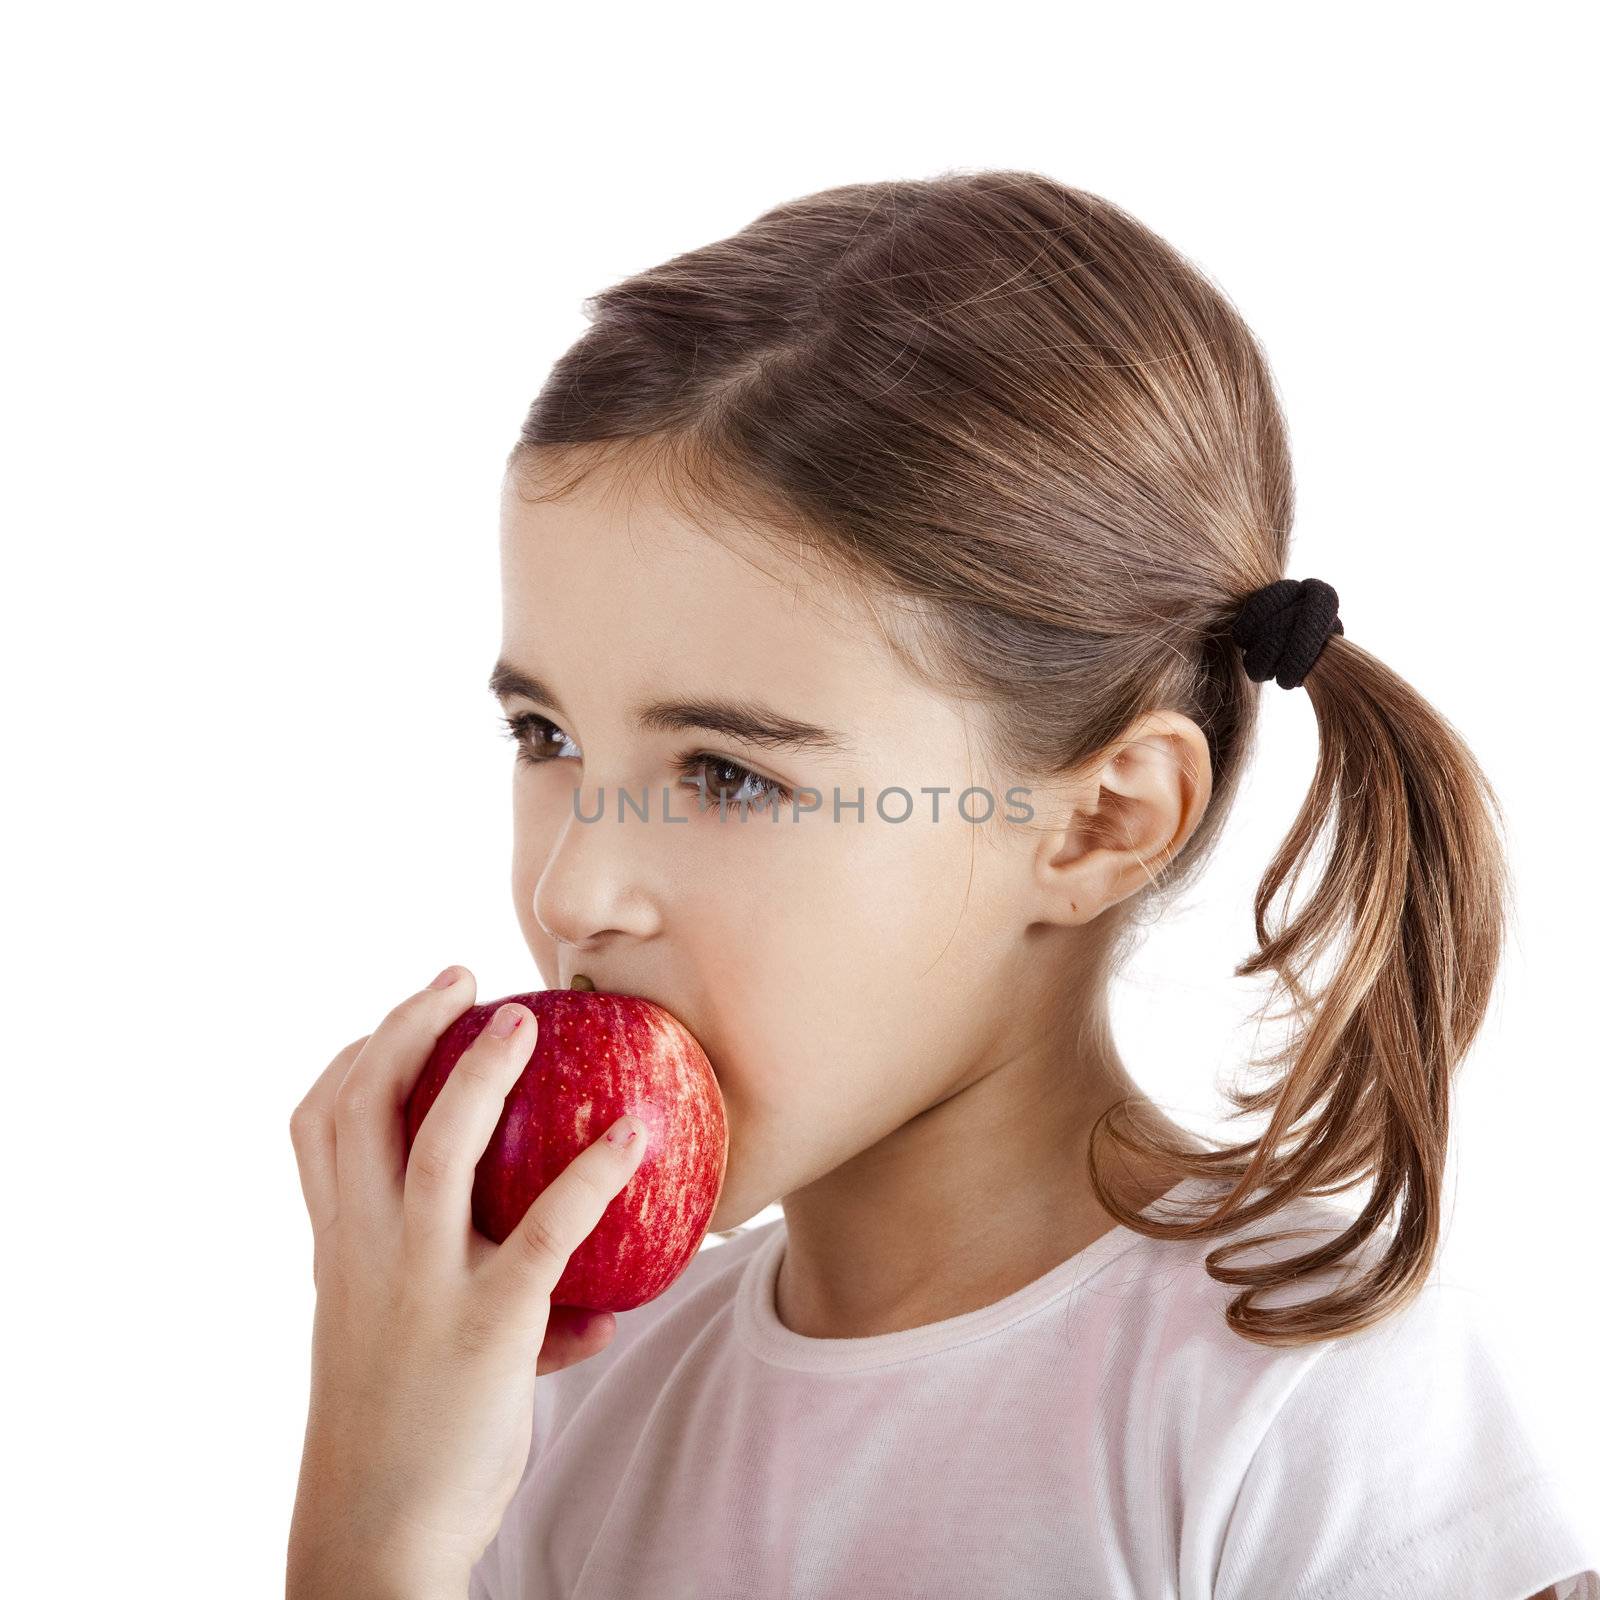 Portrait of a beautiful little girl eating a red apple